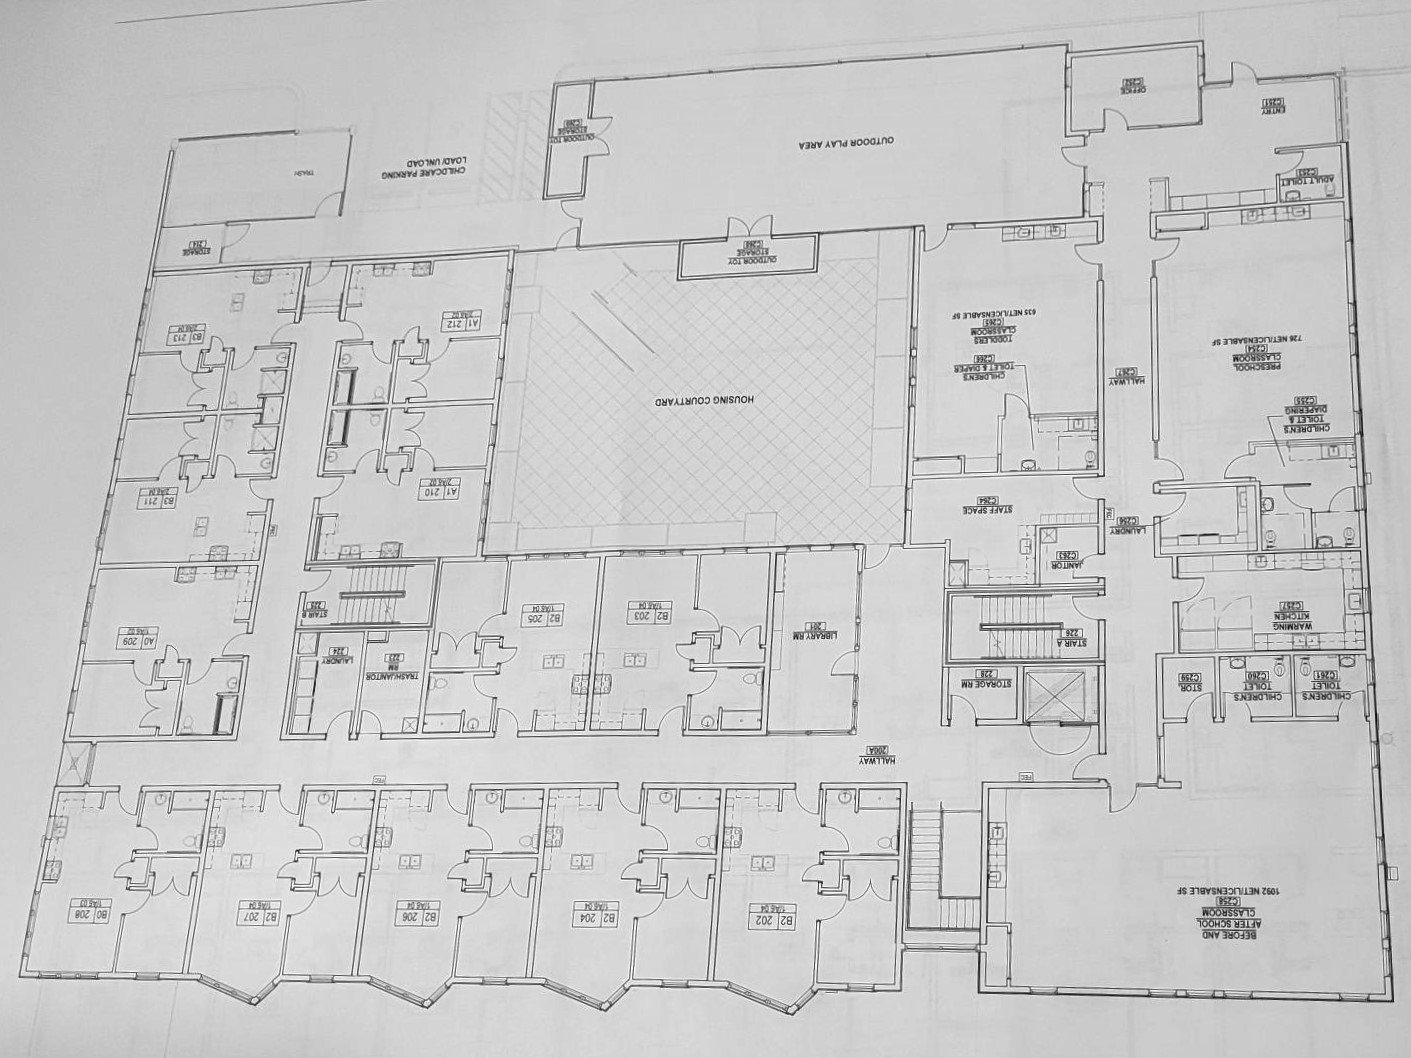 An architectural drawing shows the floor plan of an apartment building that includes a courtyard and library, as well as having a separate child care center on the property that includes an outdoor play area.